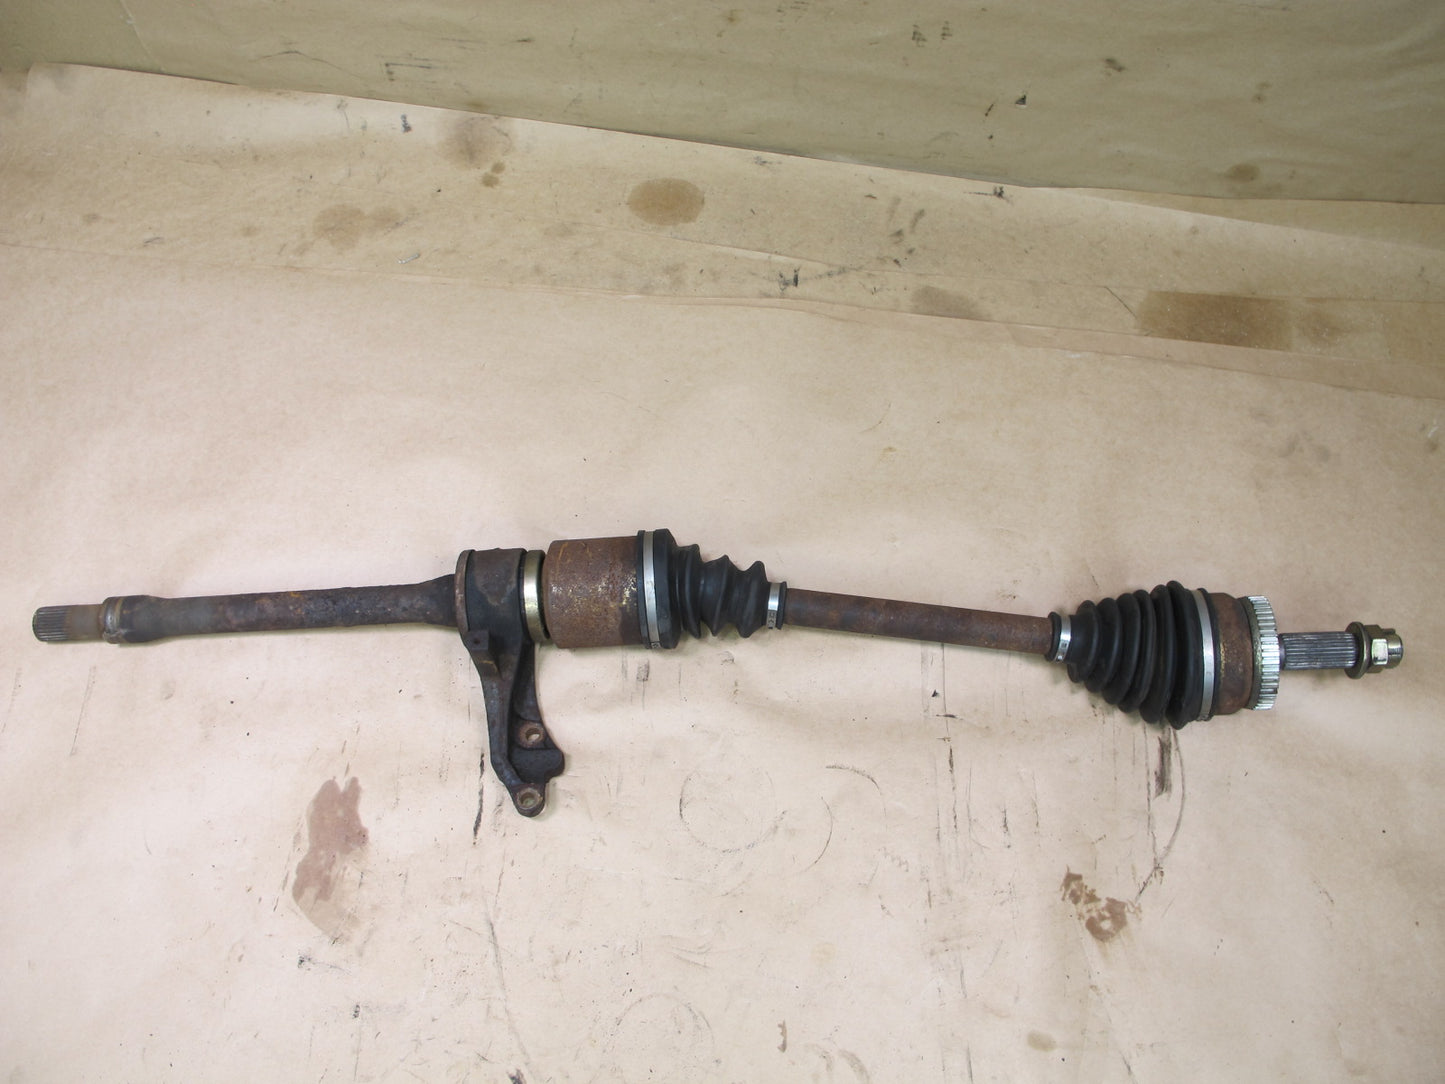 1991-1992 DODGE STEALTH 3000GT VR4 TURBO AWD FRONT LEFT SUSPENSION AXLE SHAFT